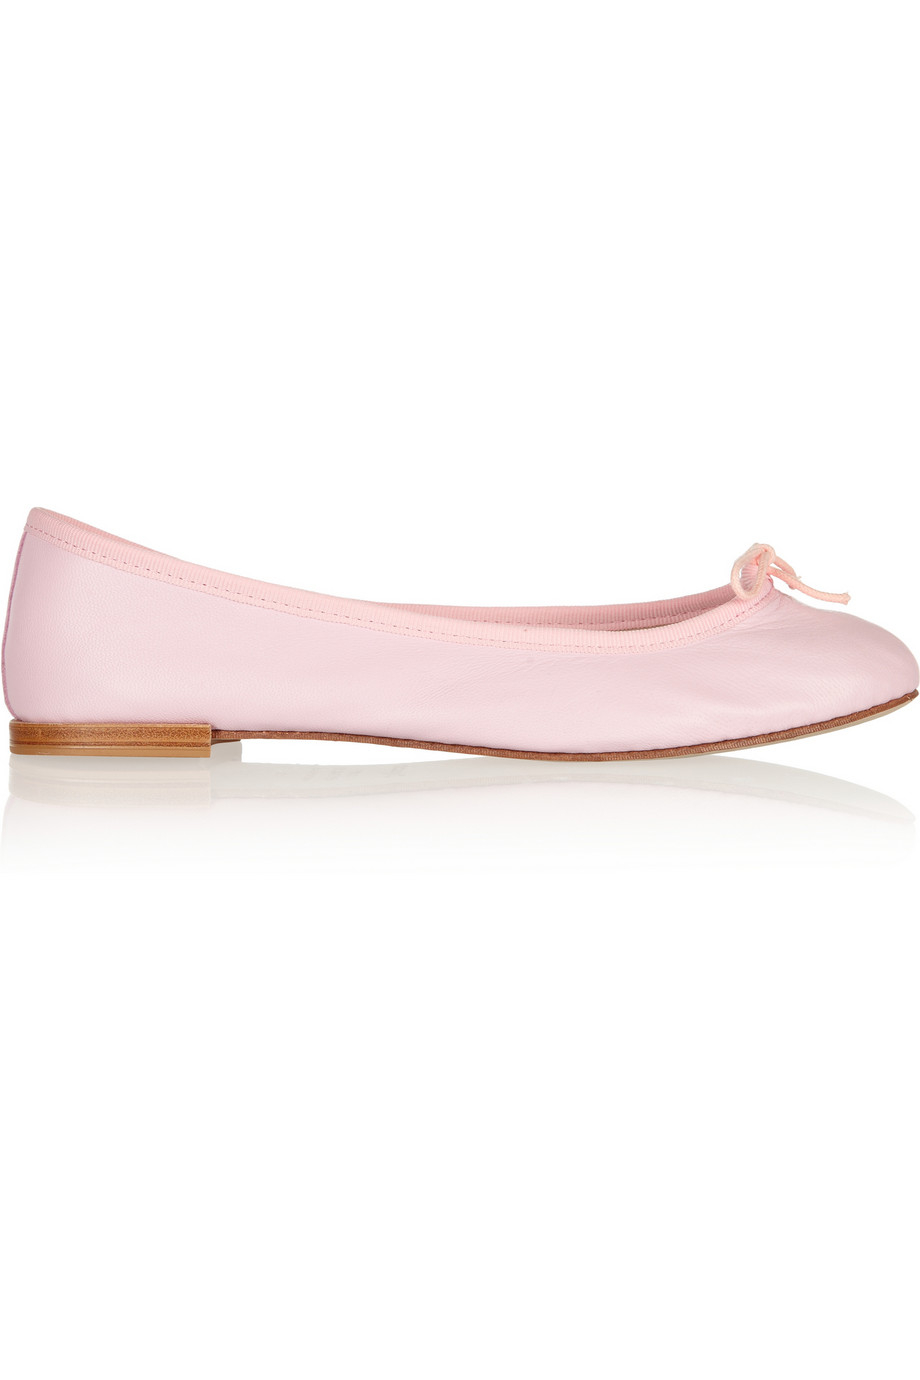 Repetto The Cendrillon Leather Ballet Flats in Pink | Lyst